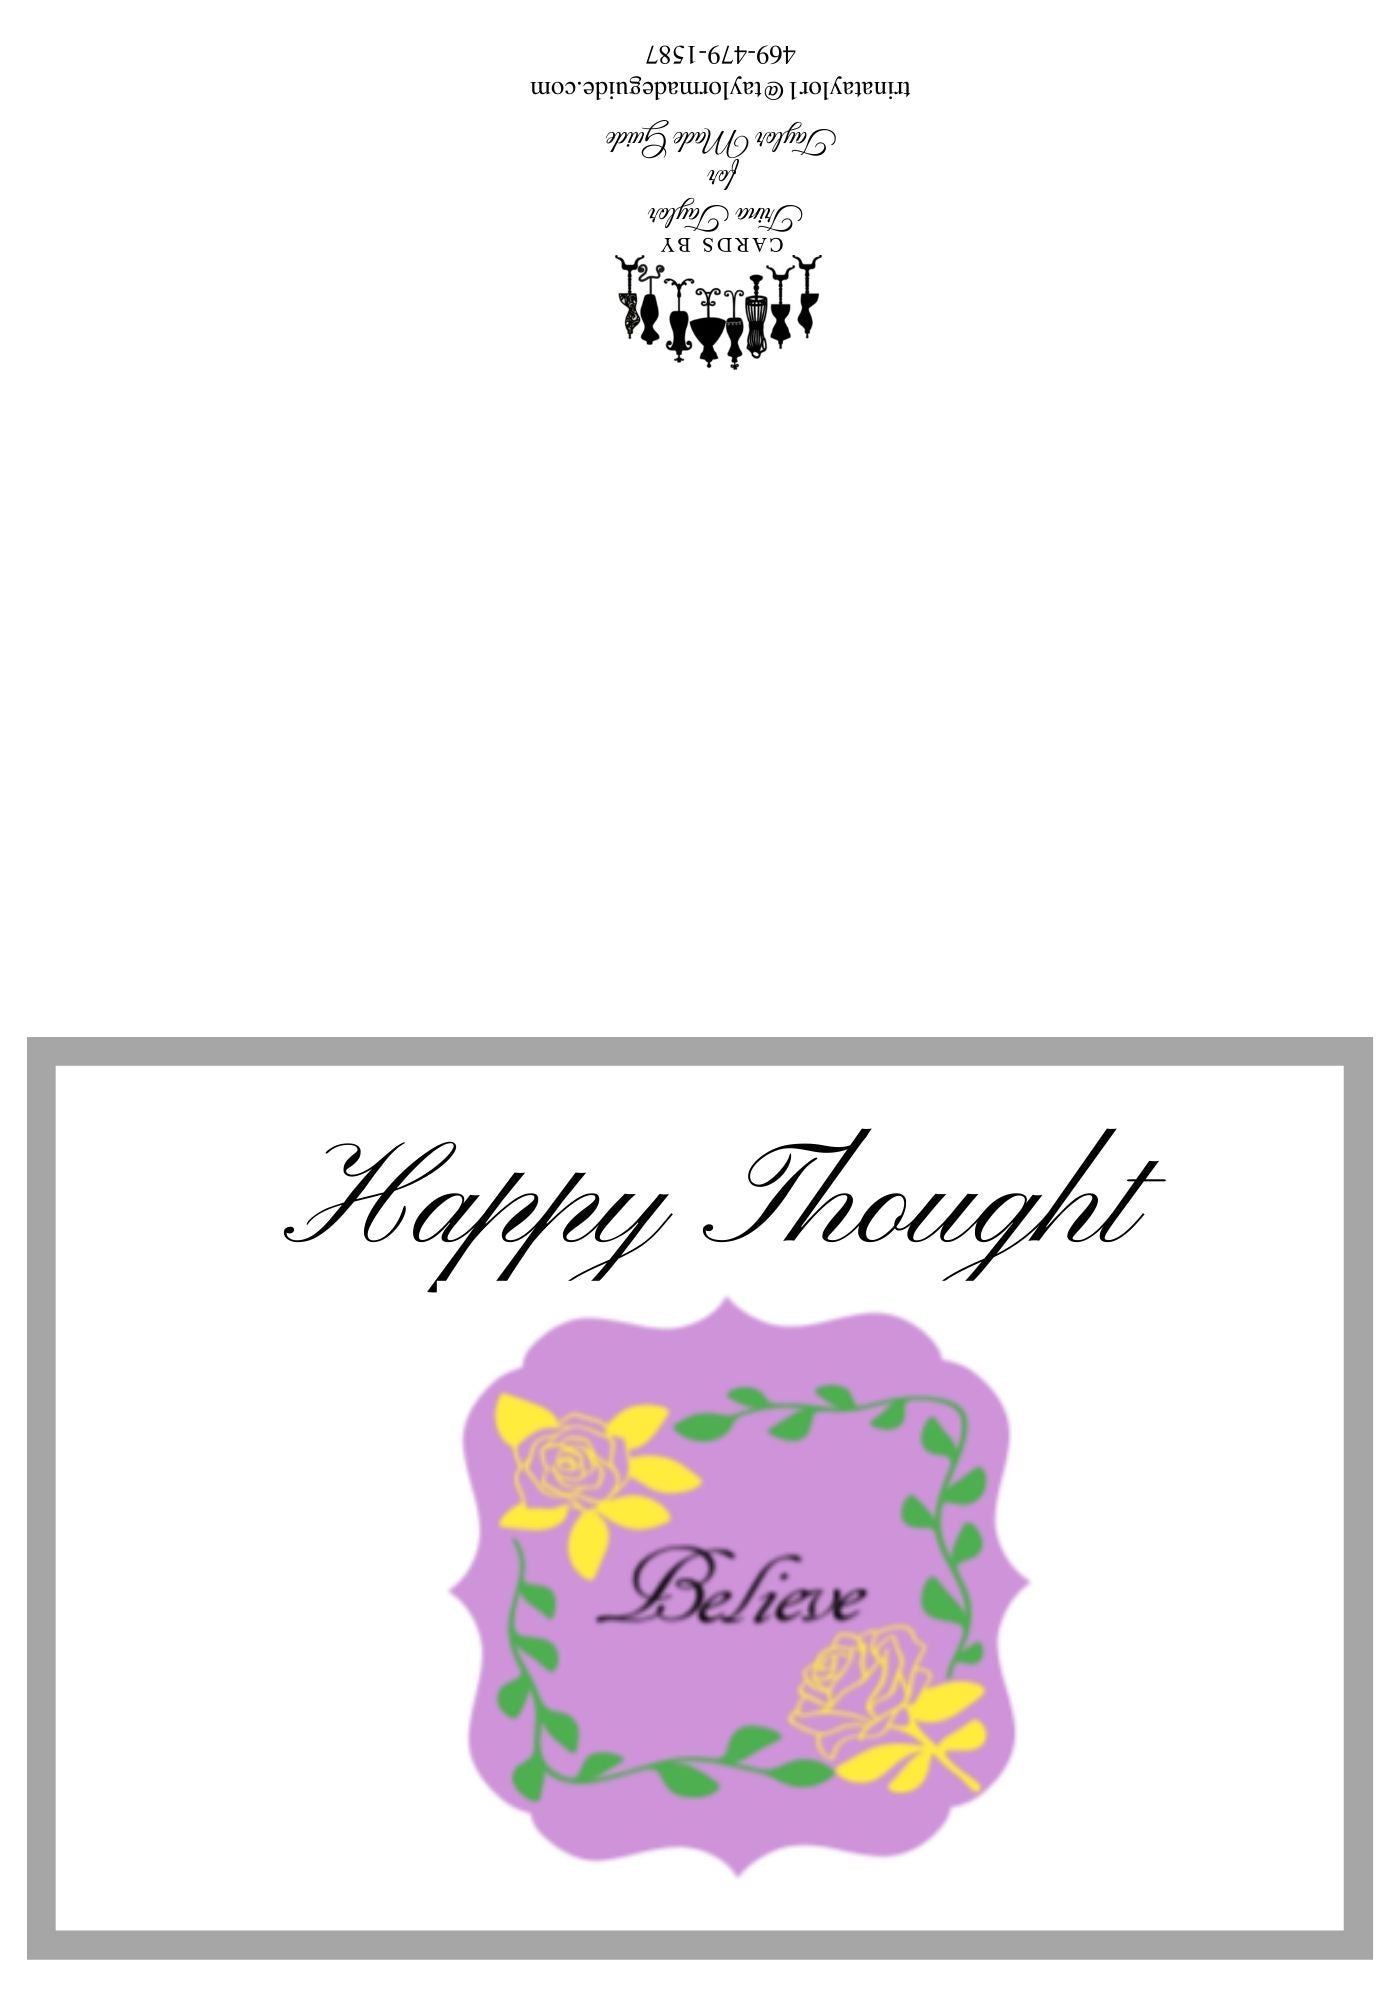 Happy Thought, Believe